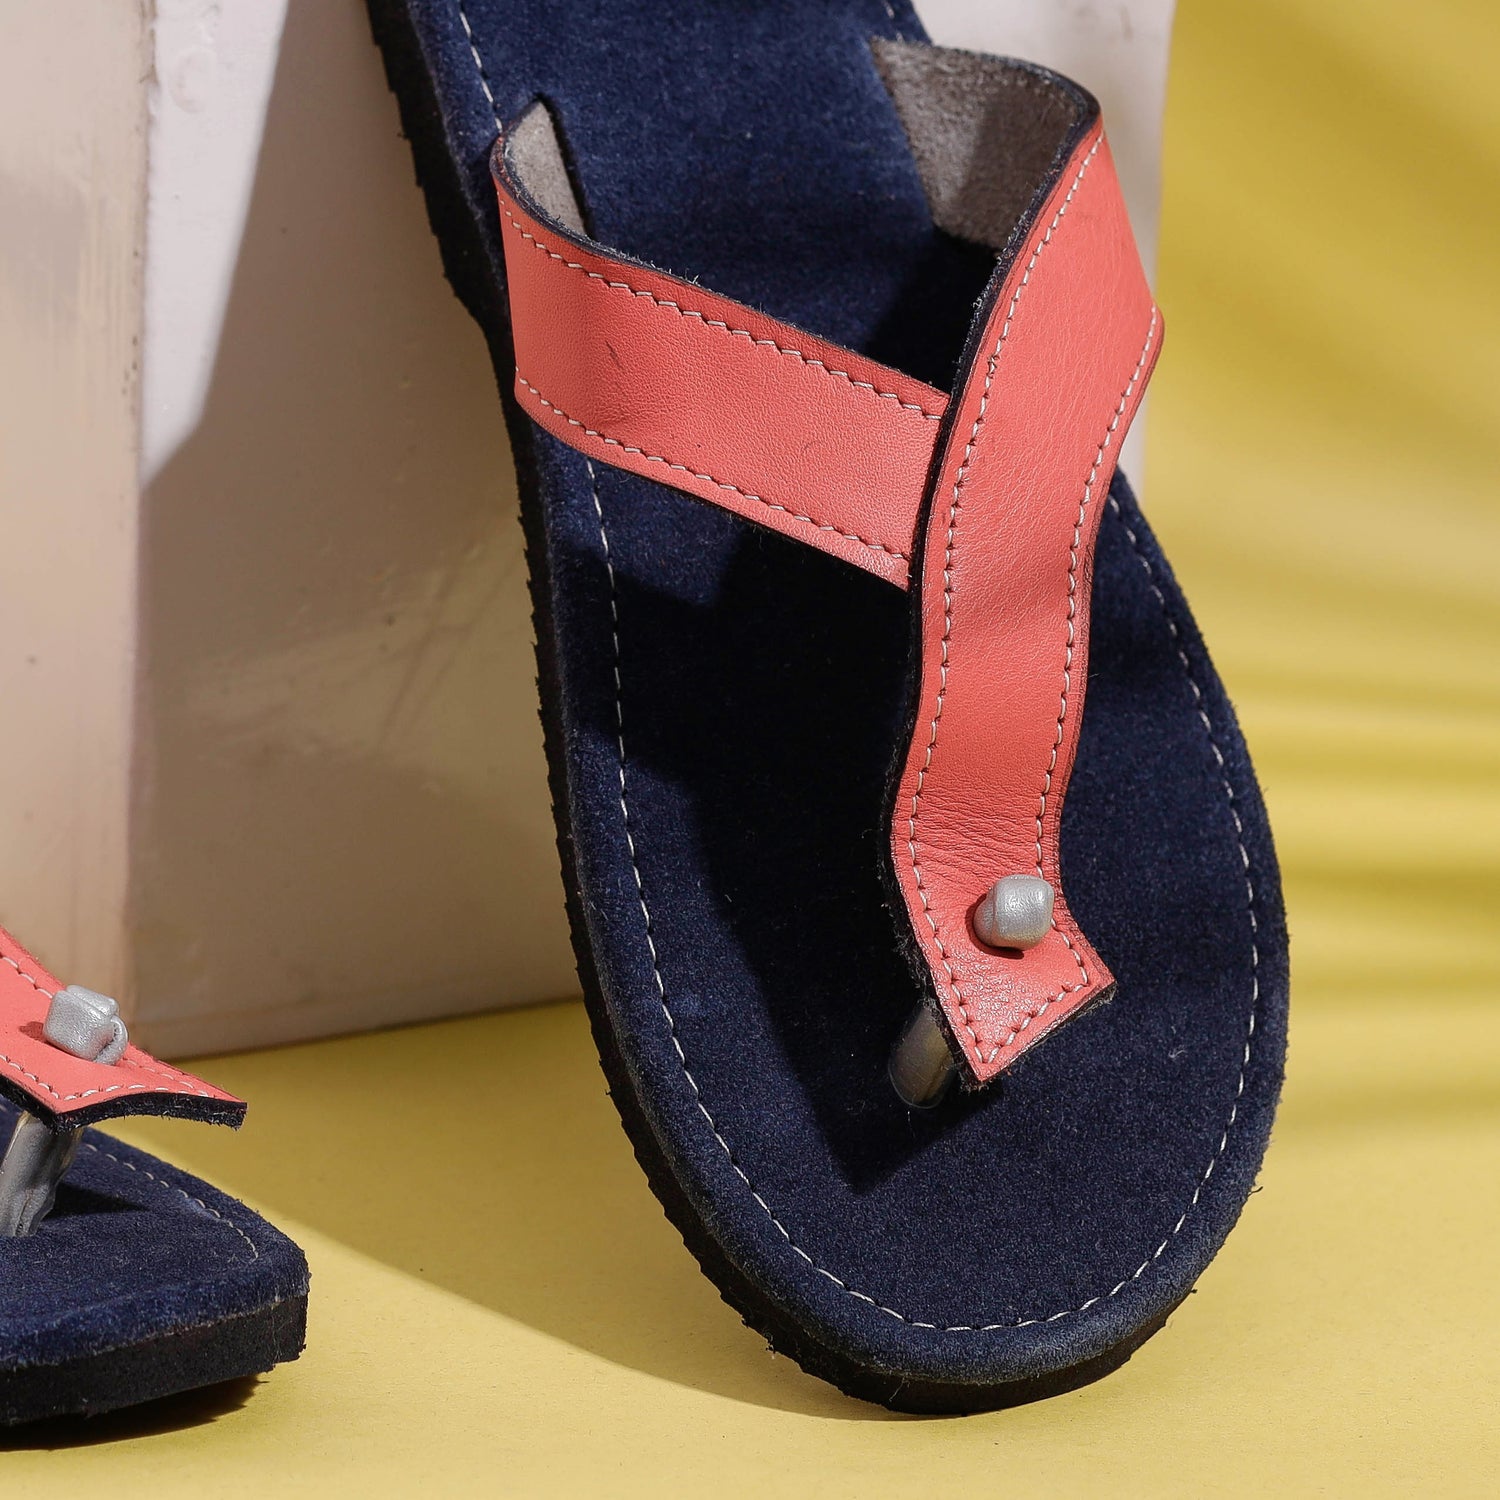 Dark Blue & Pink Handcrafted Women's Leather Slippers with Suede